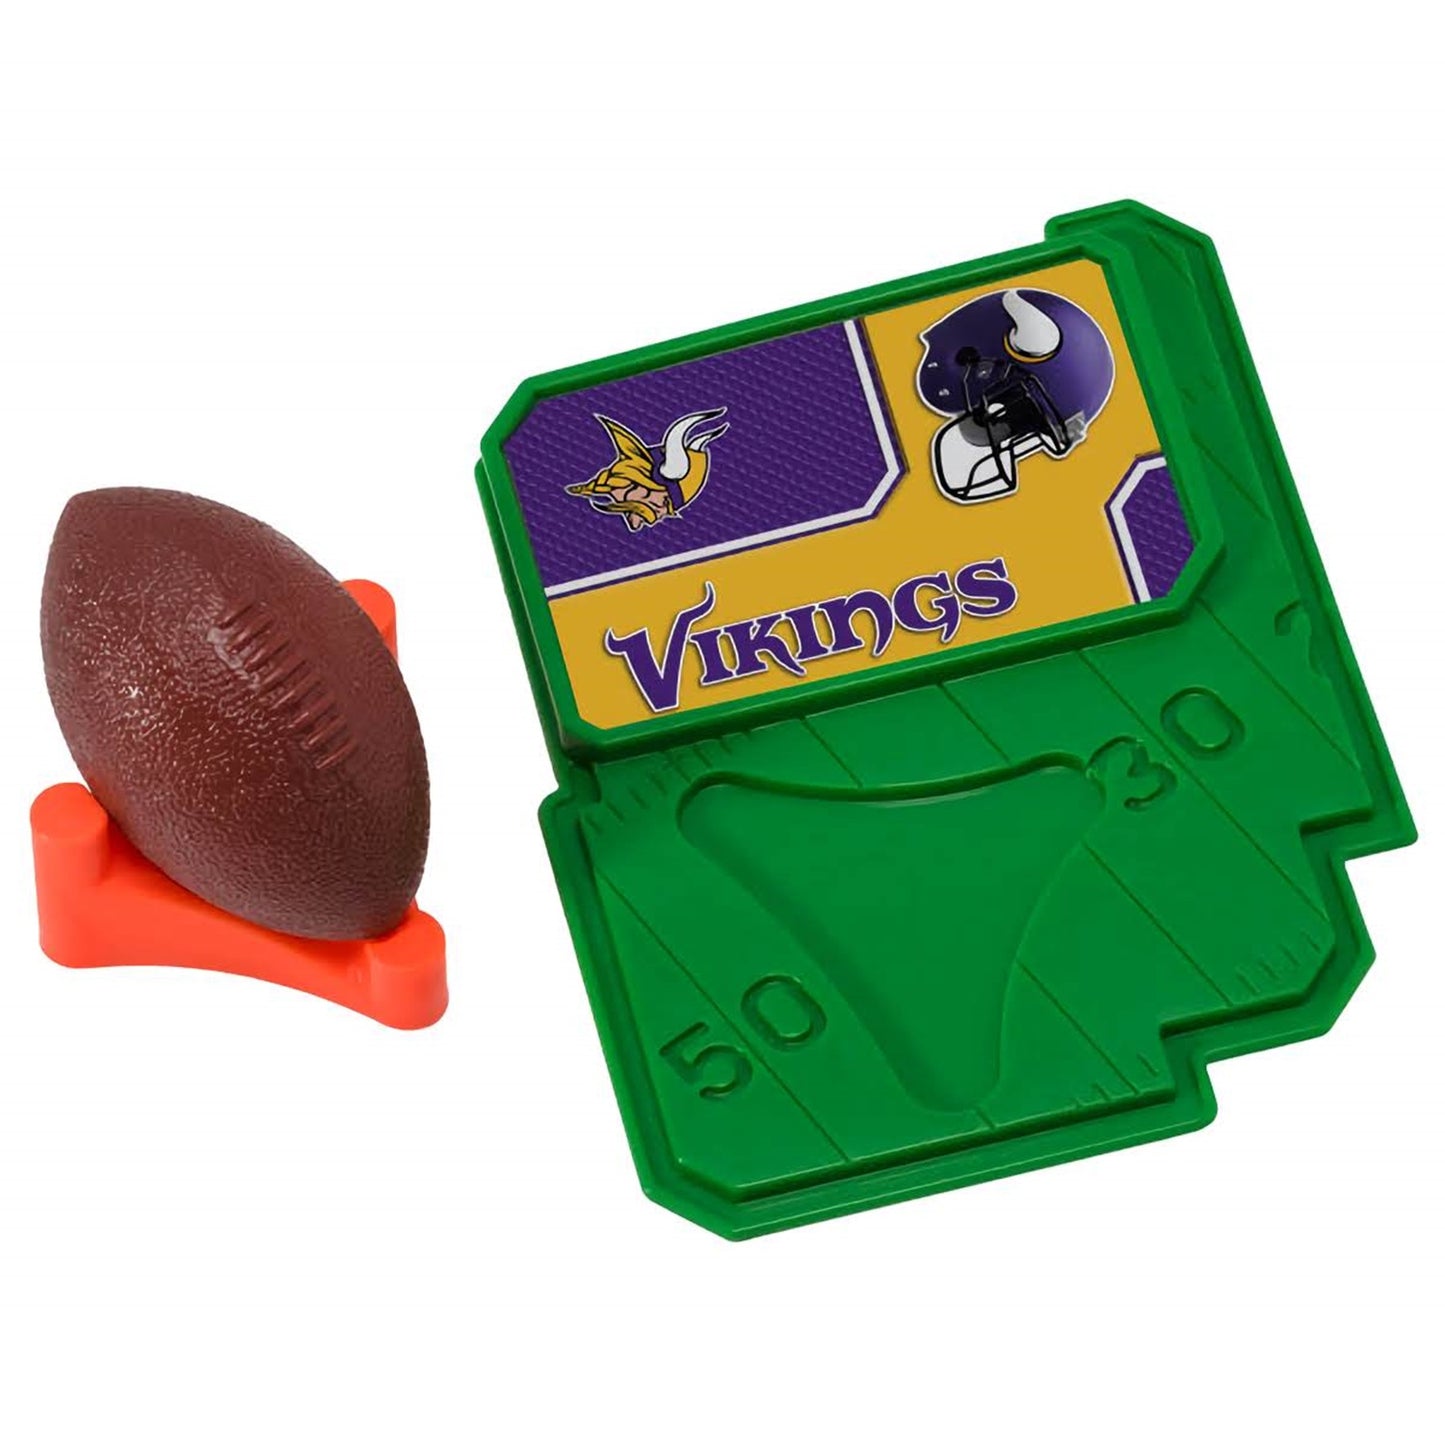 Minnesota Vikings NFL football and tee cake decorating kit, with a detailed miniature football and goalposts, perfect for football-themed events and Vikings fans' birthdays.